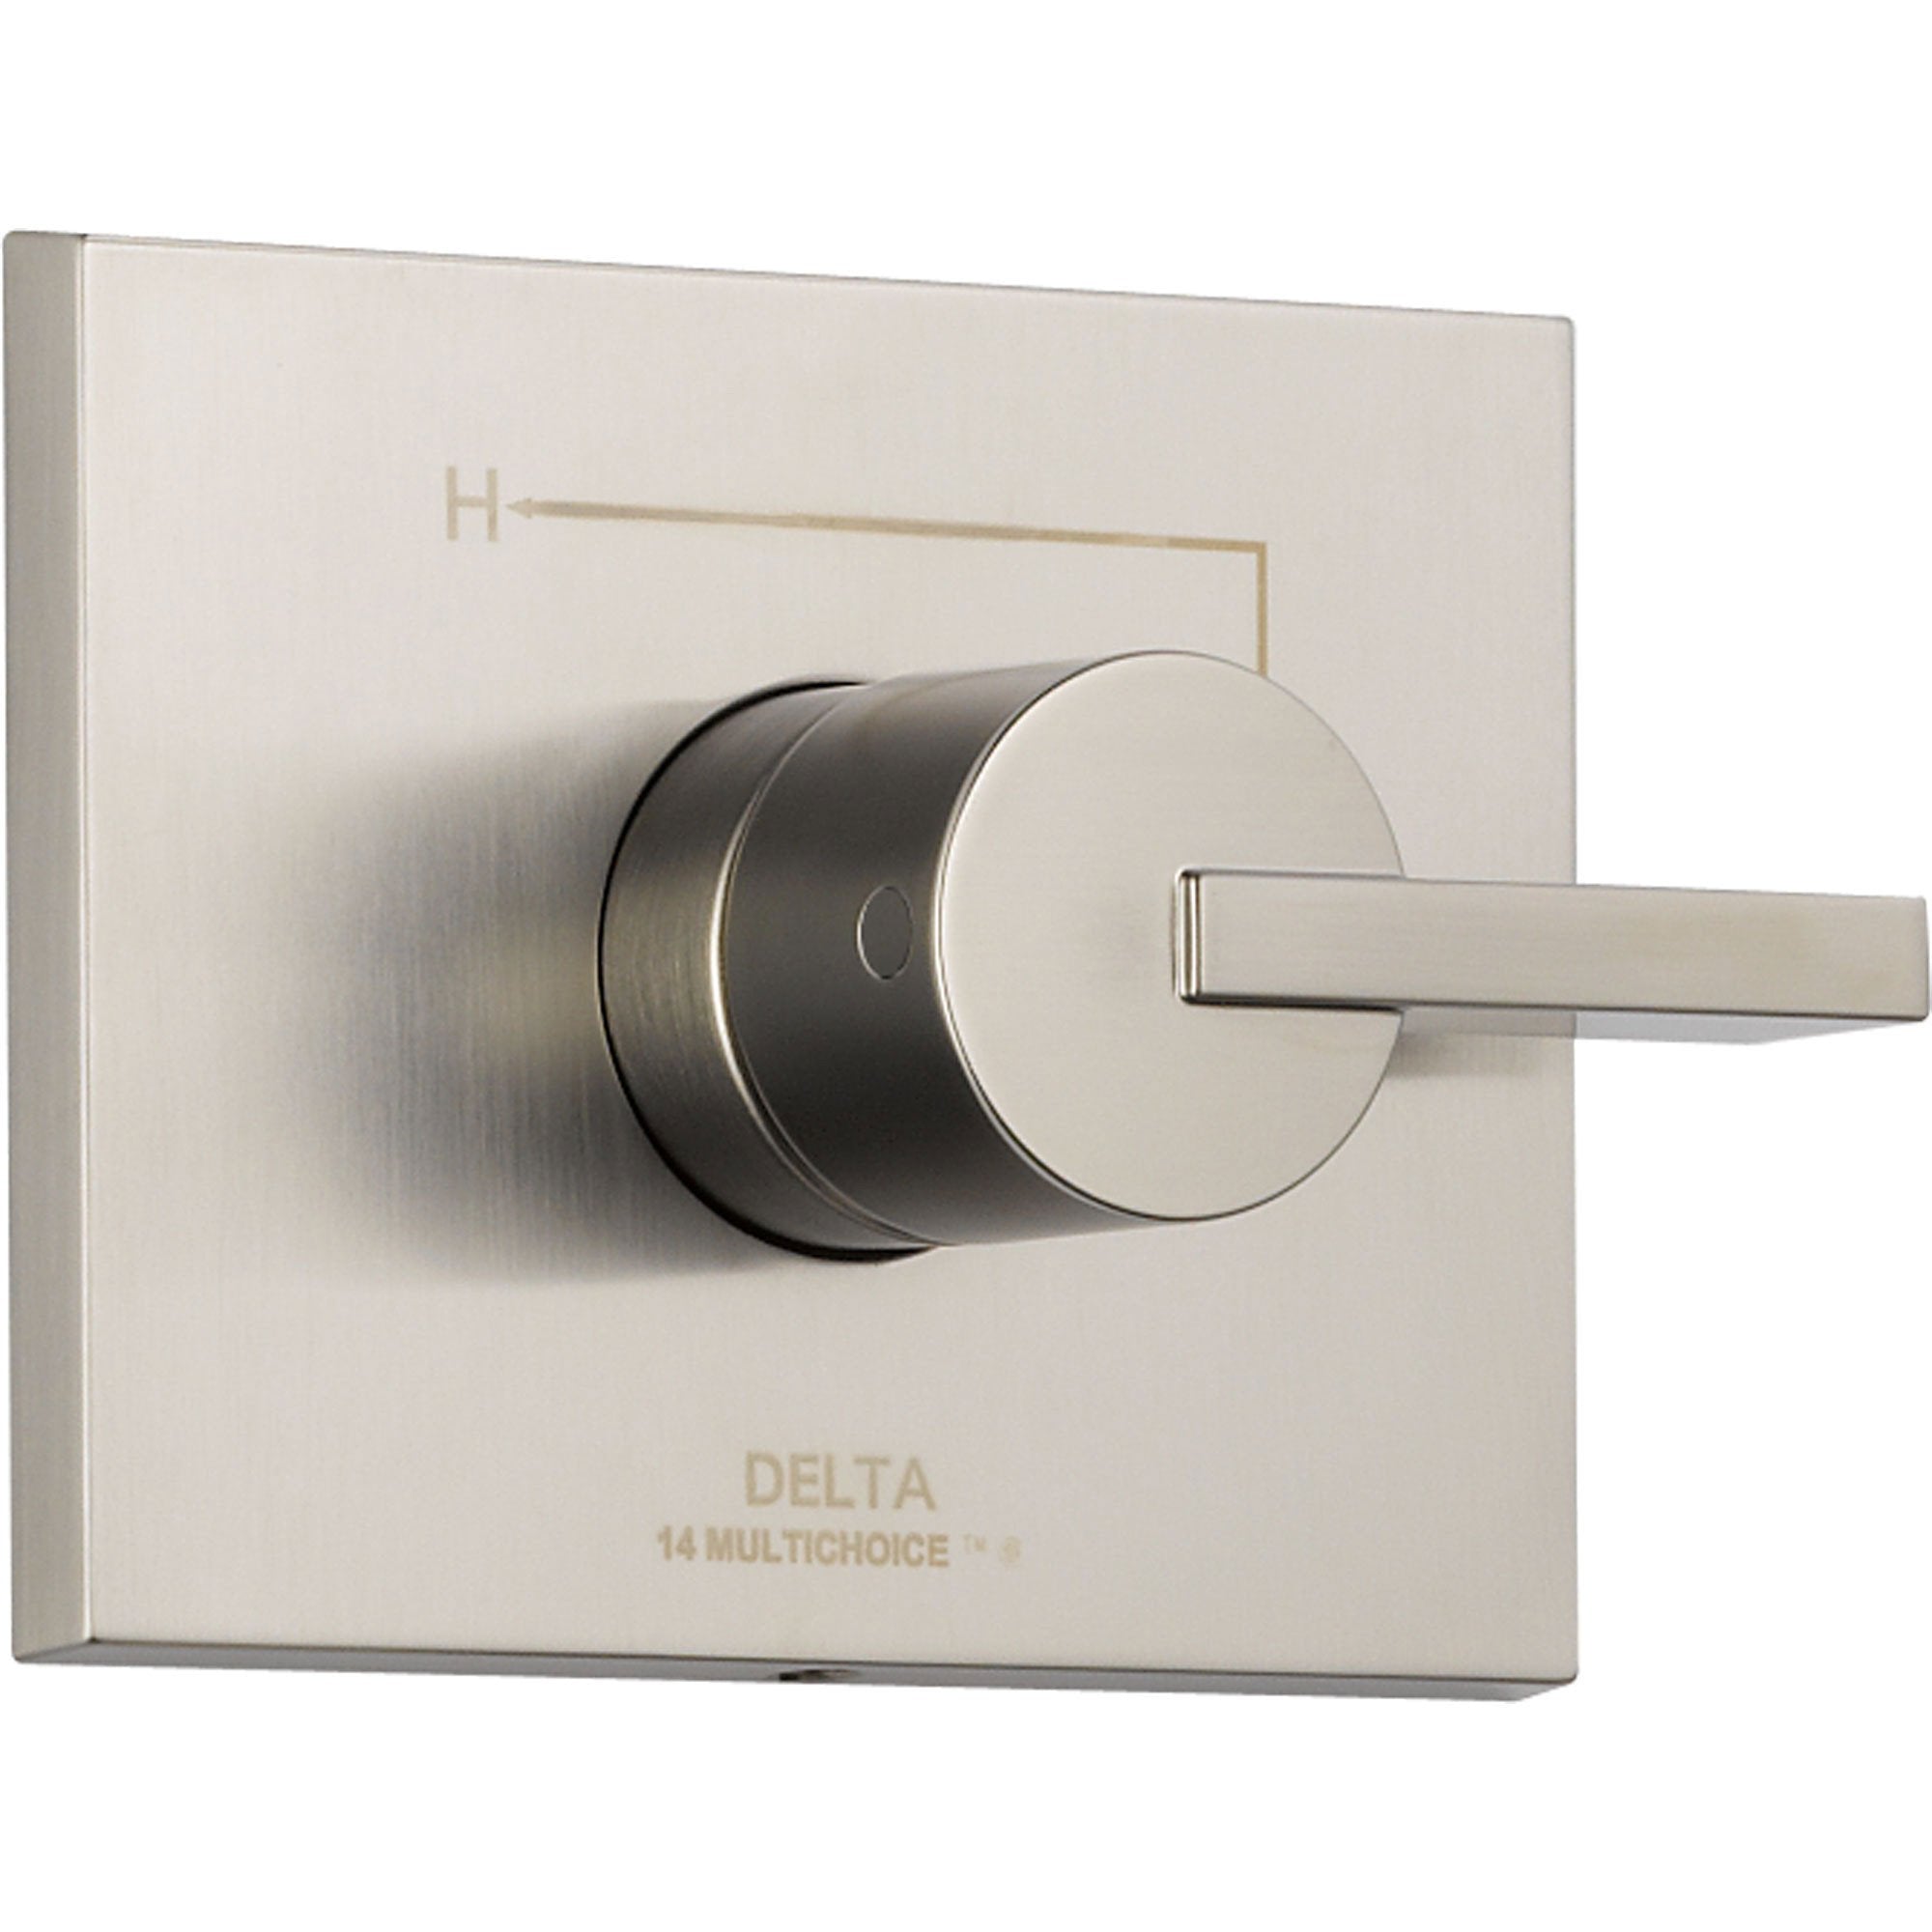 Delta Vero Stainless Steel Finish Single Handle Shower Control with Valve D019V